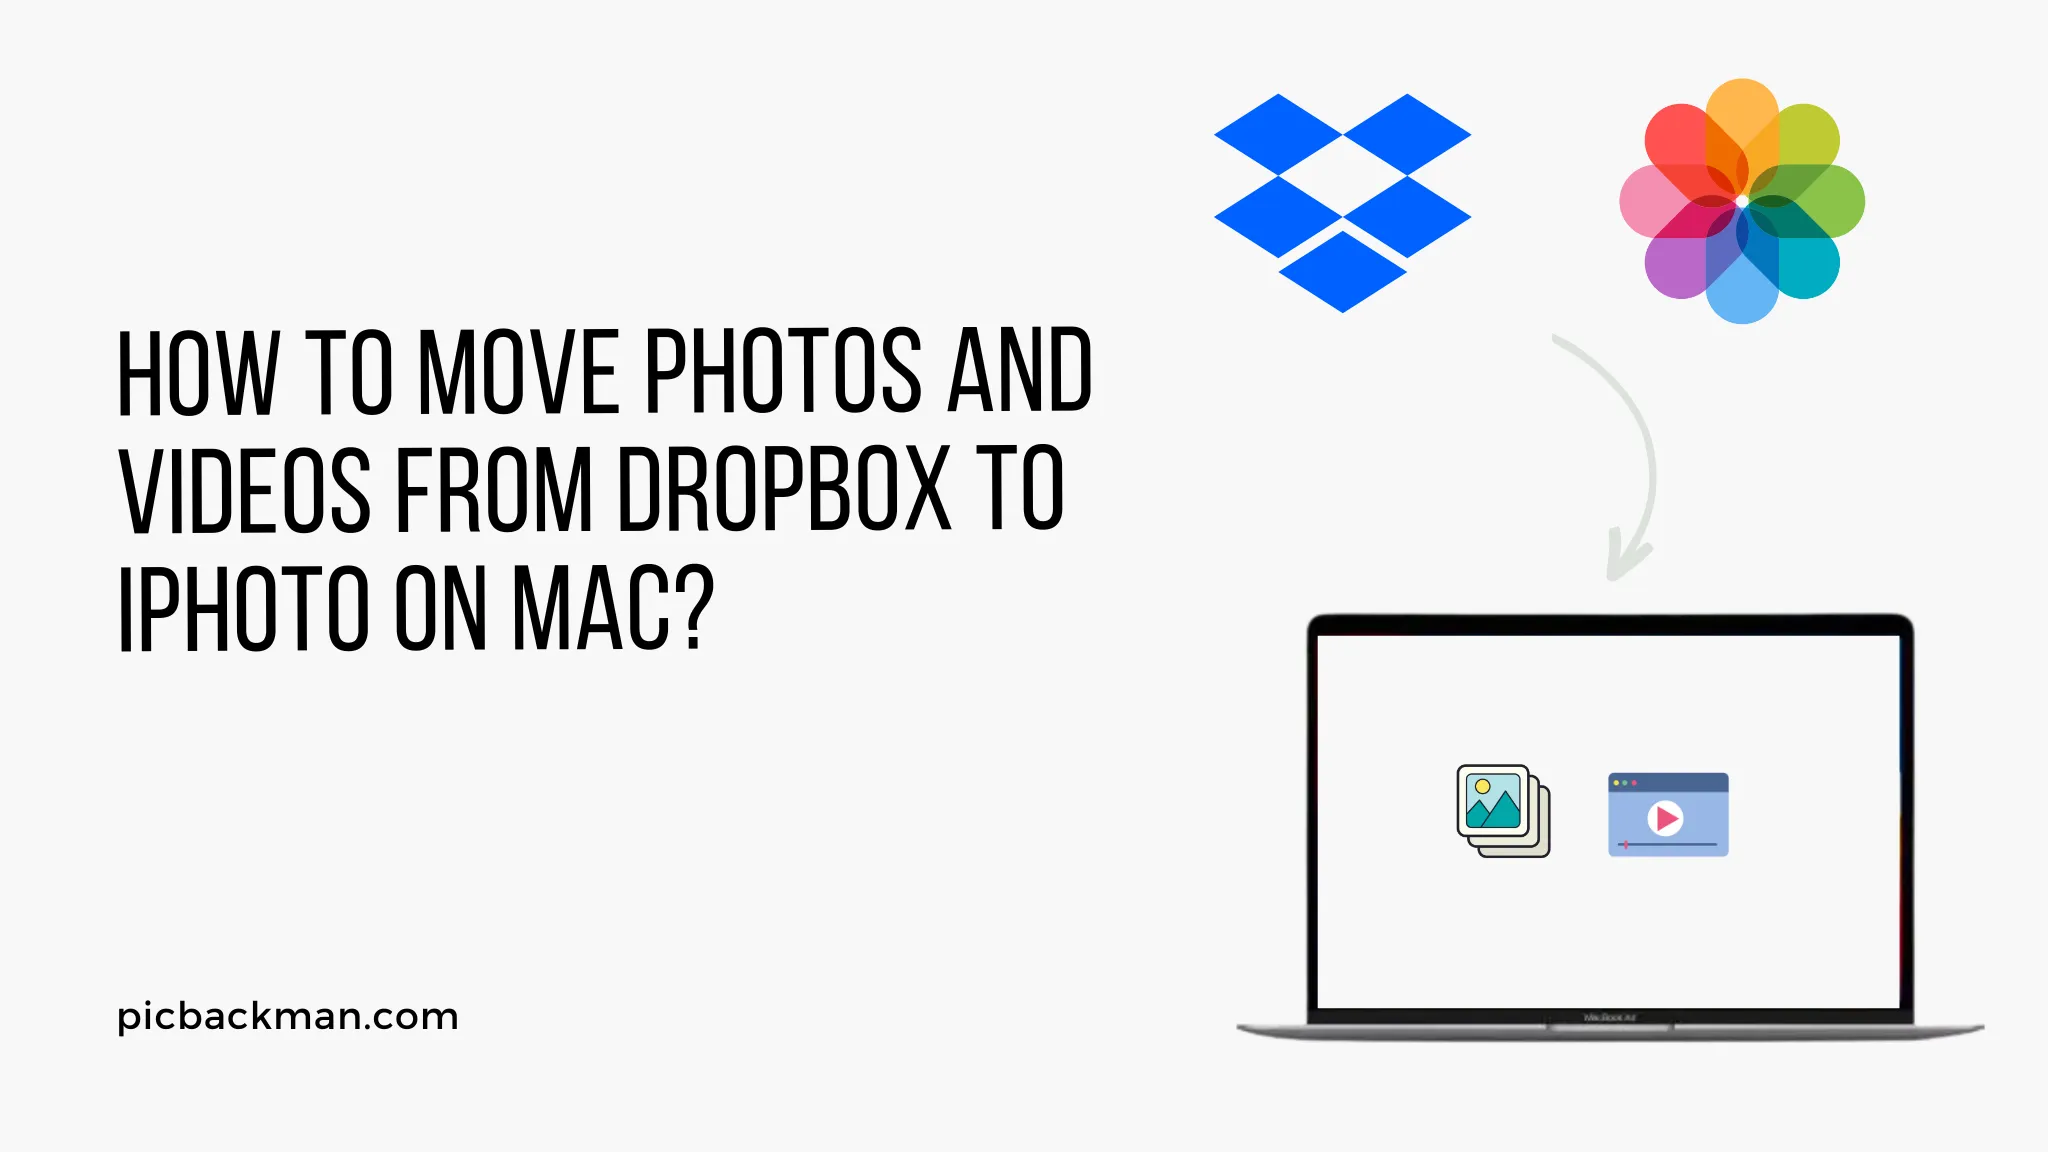 How to Move Photos and Videos from Dropbox to iPhoto on Mac?